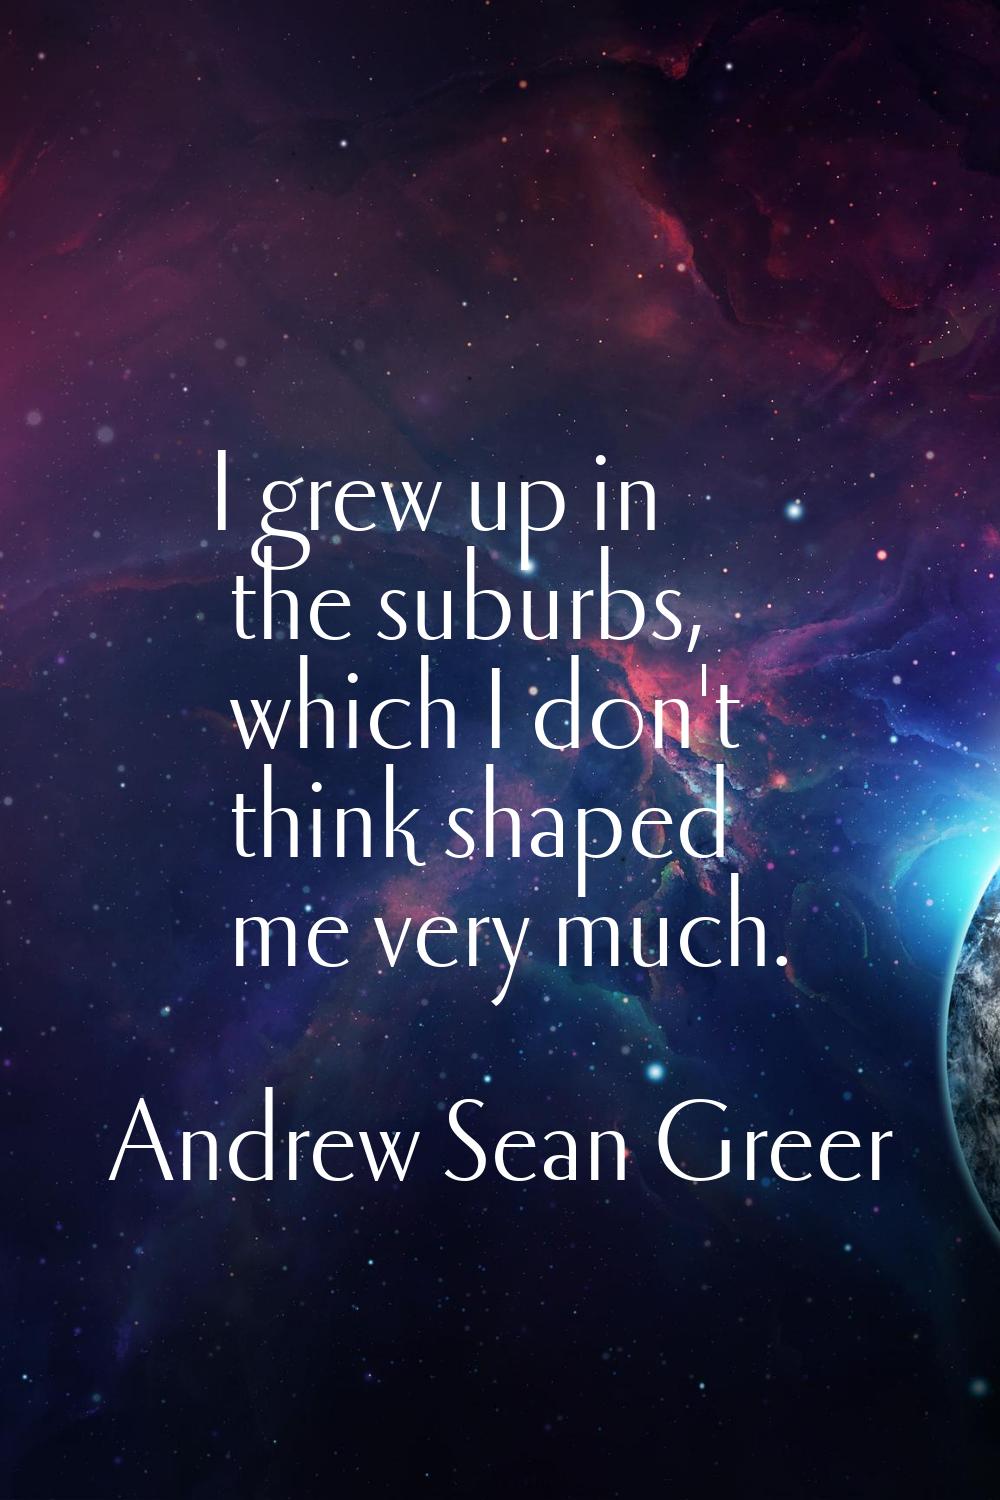 I grew up in the suburbs, which I don't think shaped me very much.